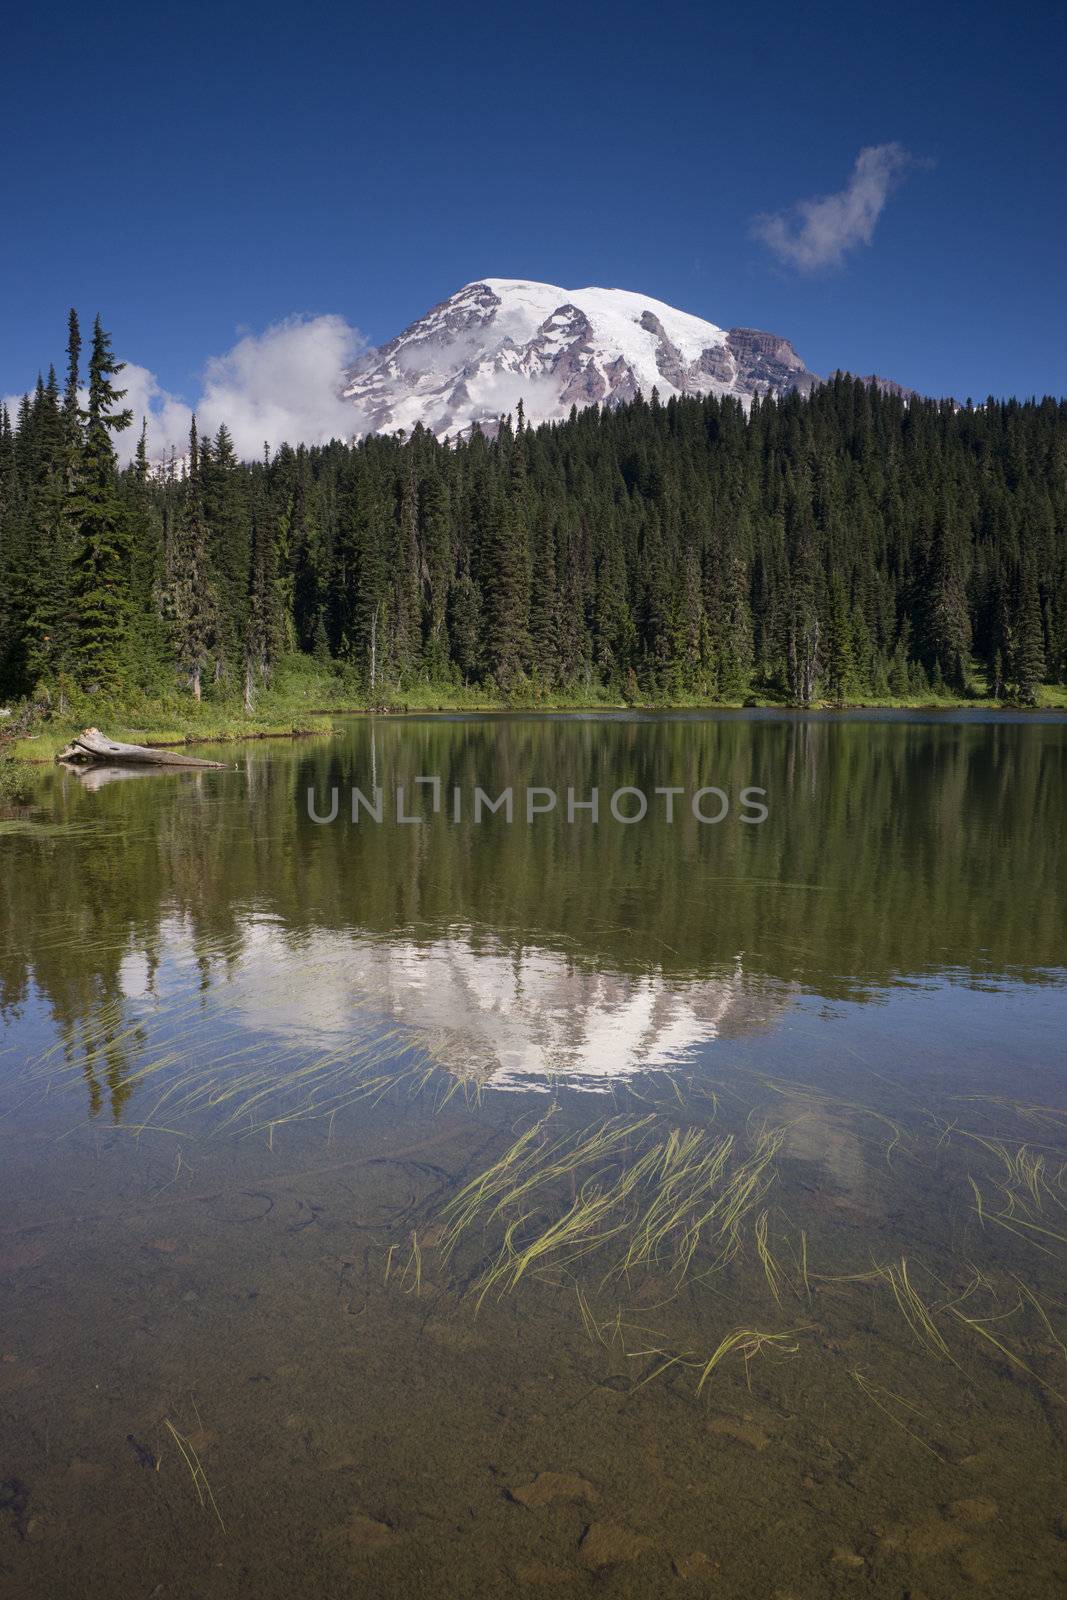 Mt. Rainier and Reflection Lake by ChrisBoswell